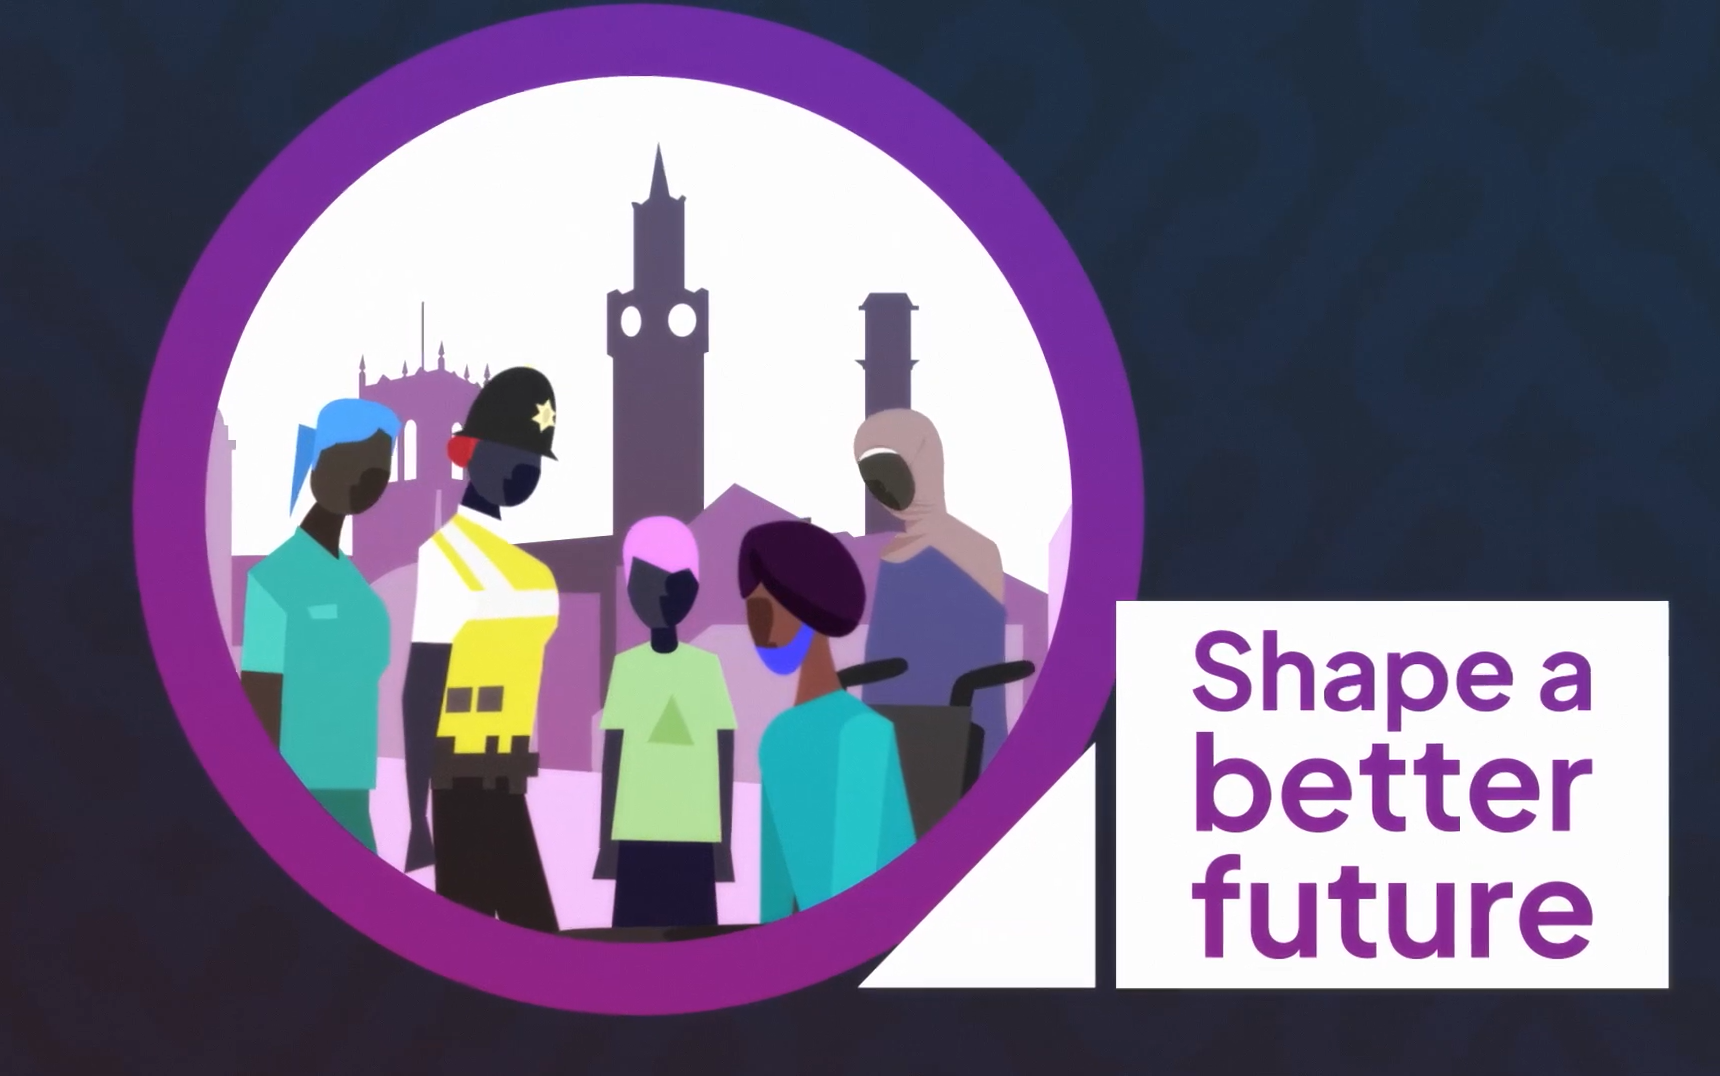 Screenshot from an animated video showing five characters stood in front of a city landscape with the words "shape a better future"